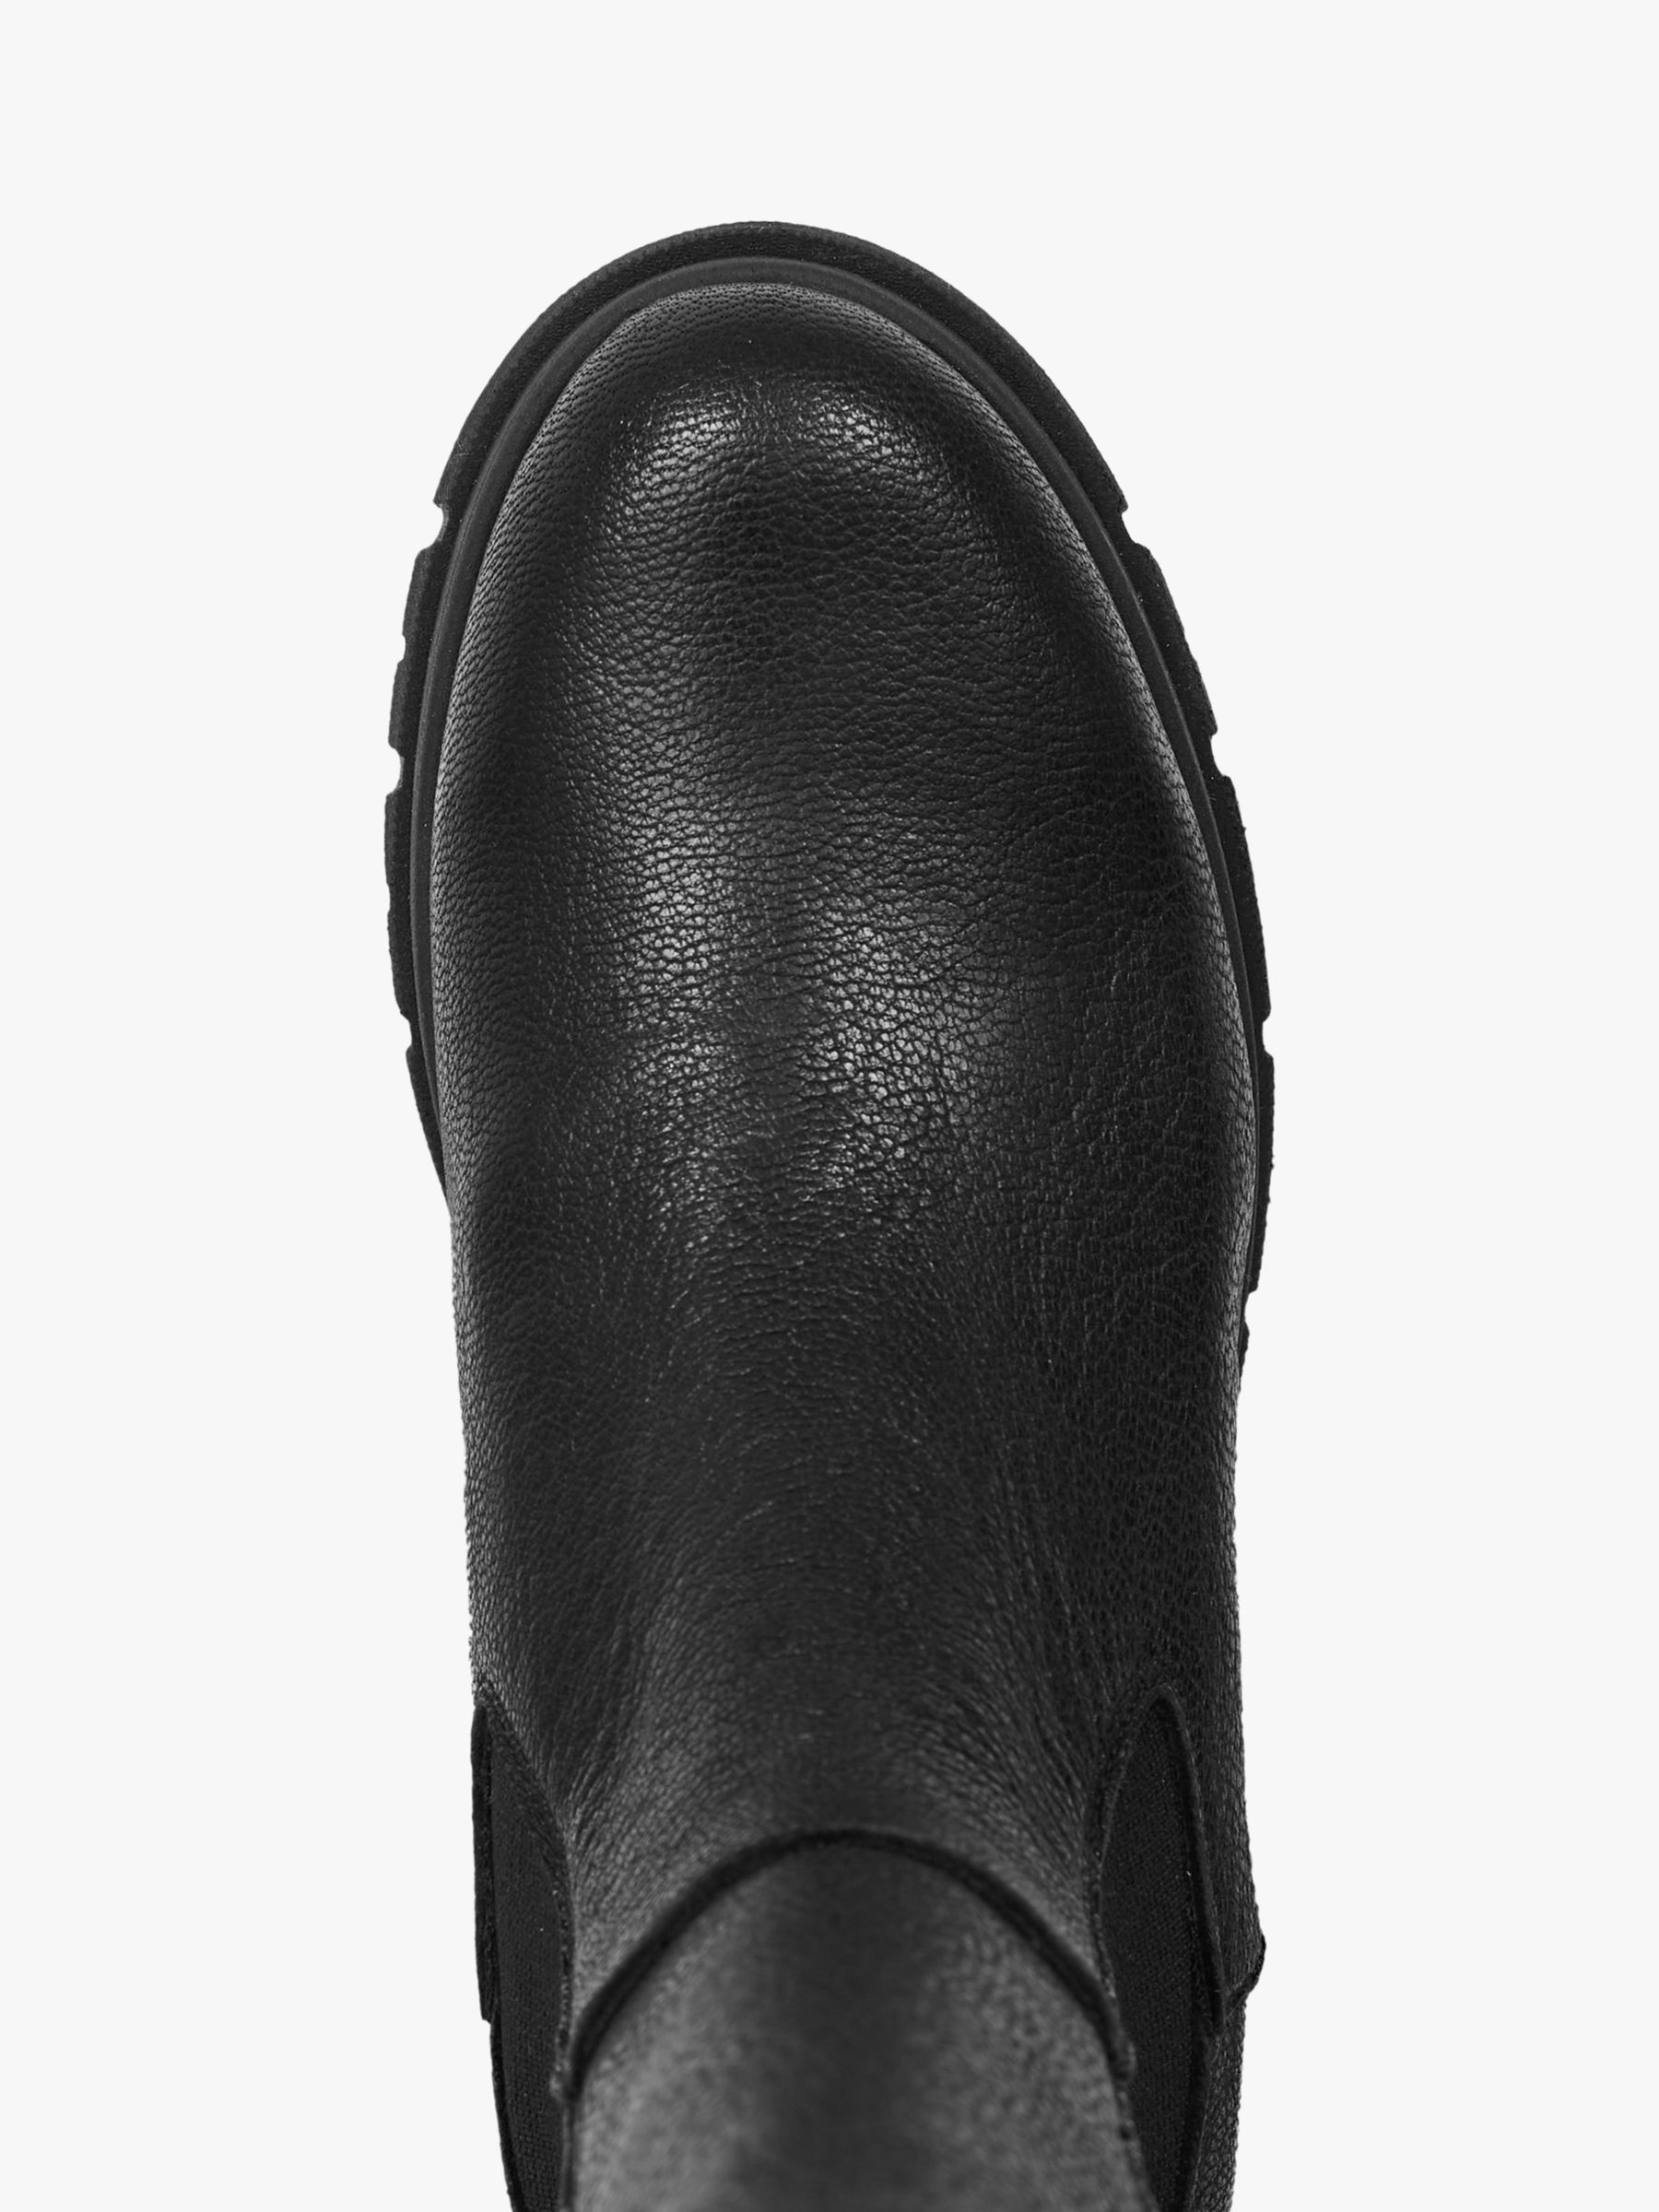 Buy Celtic & Co. Chunky Tall Leather Chelsea Boot, Black Online at johnlewis.com